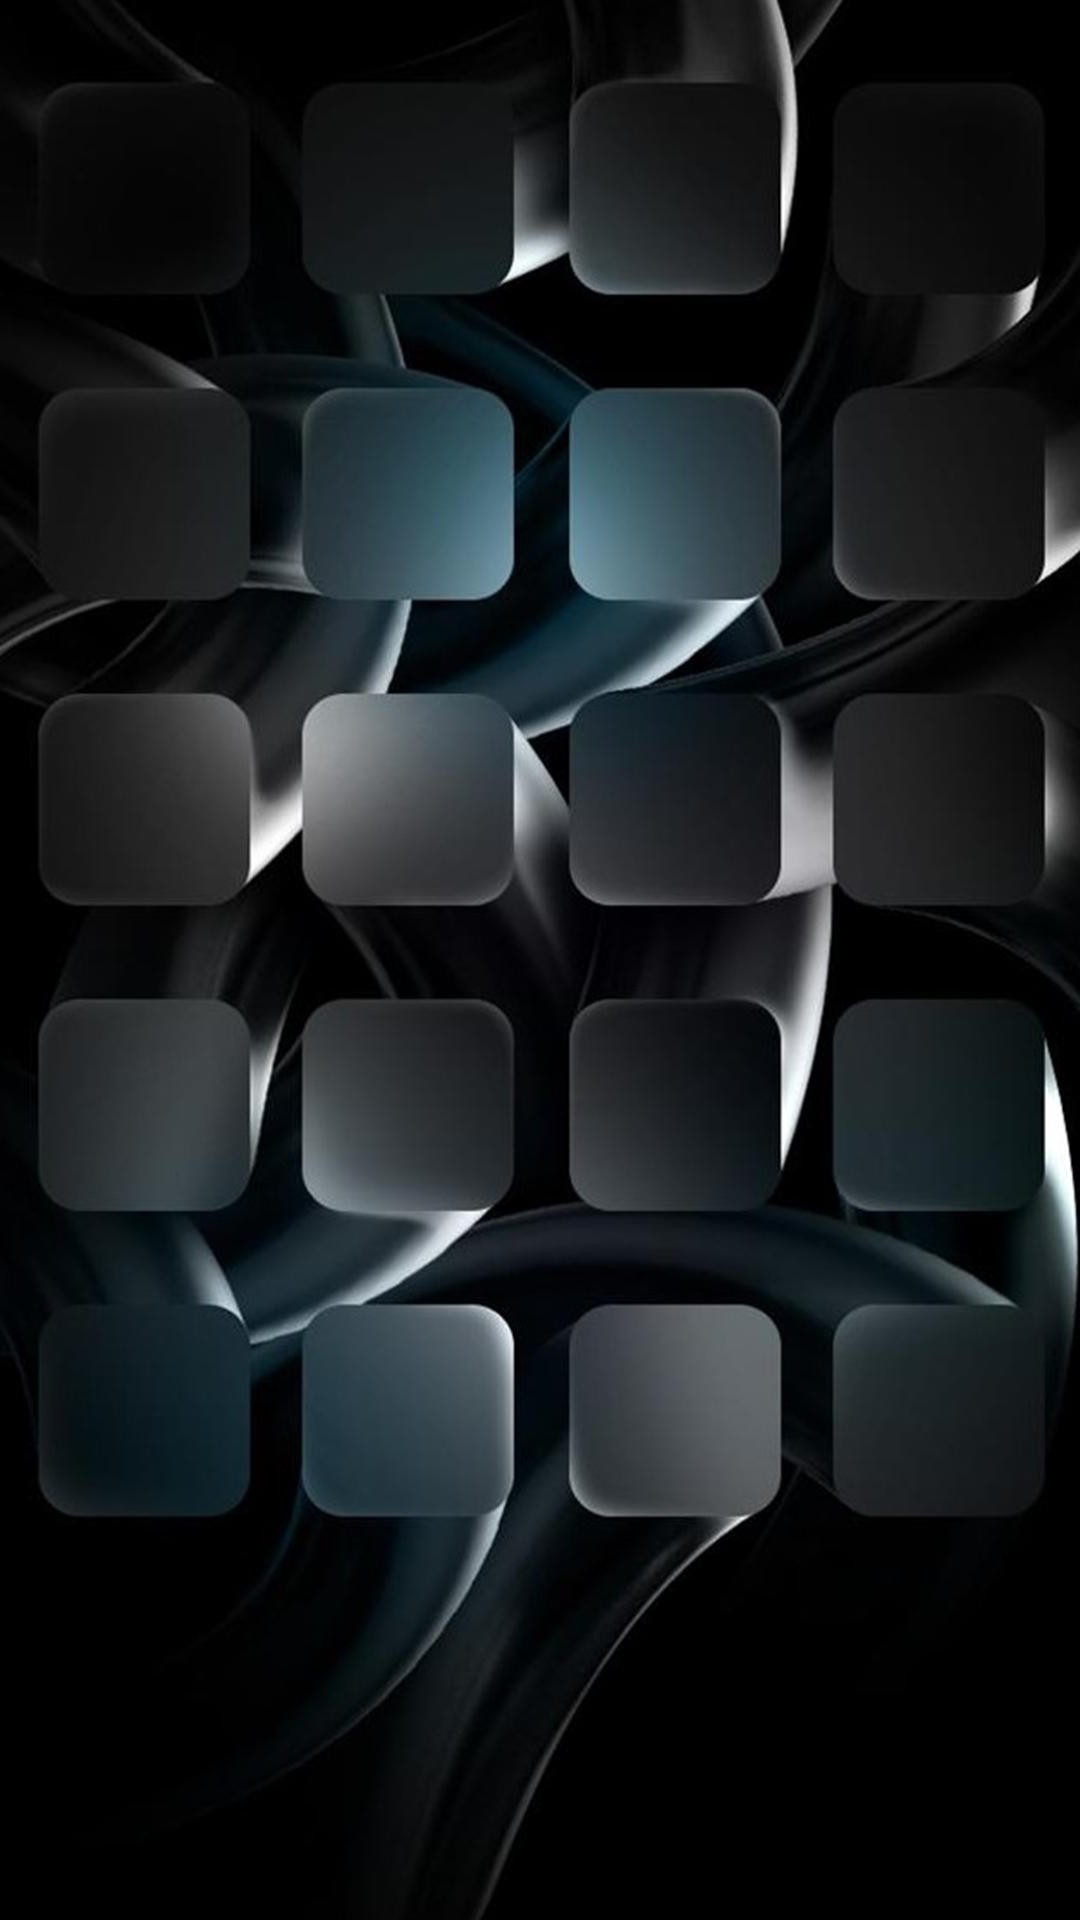 1080x1920 free abstract phone wallpapers wallpapercraft